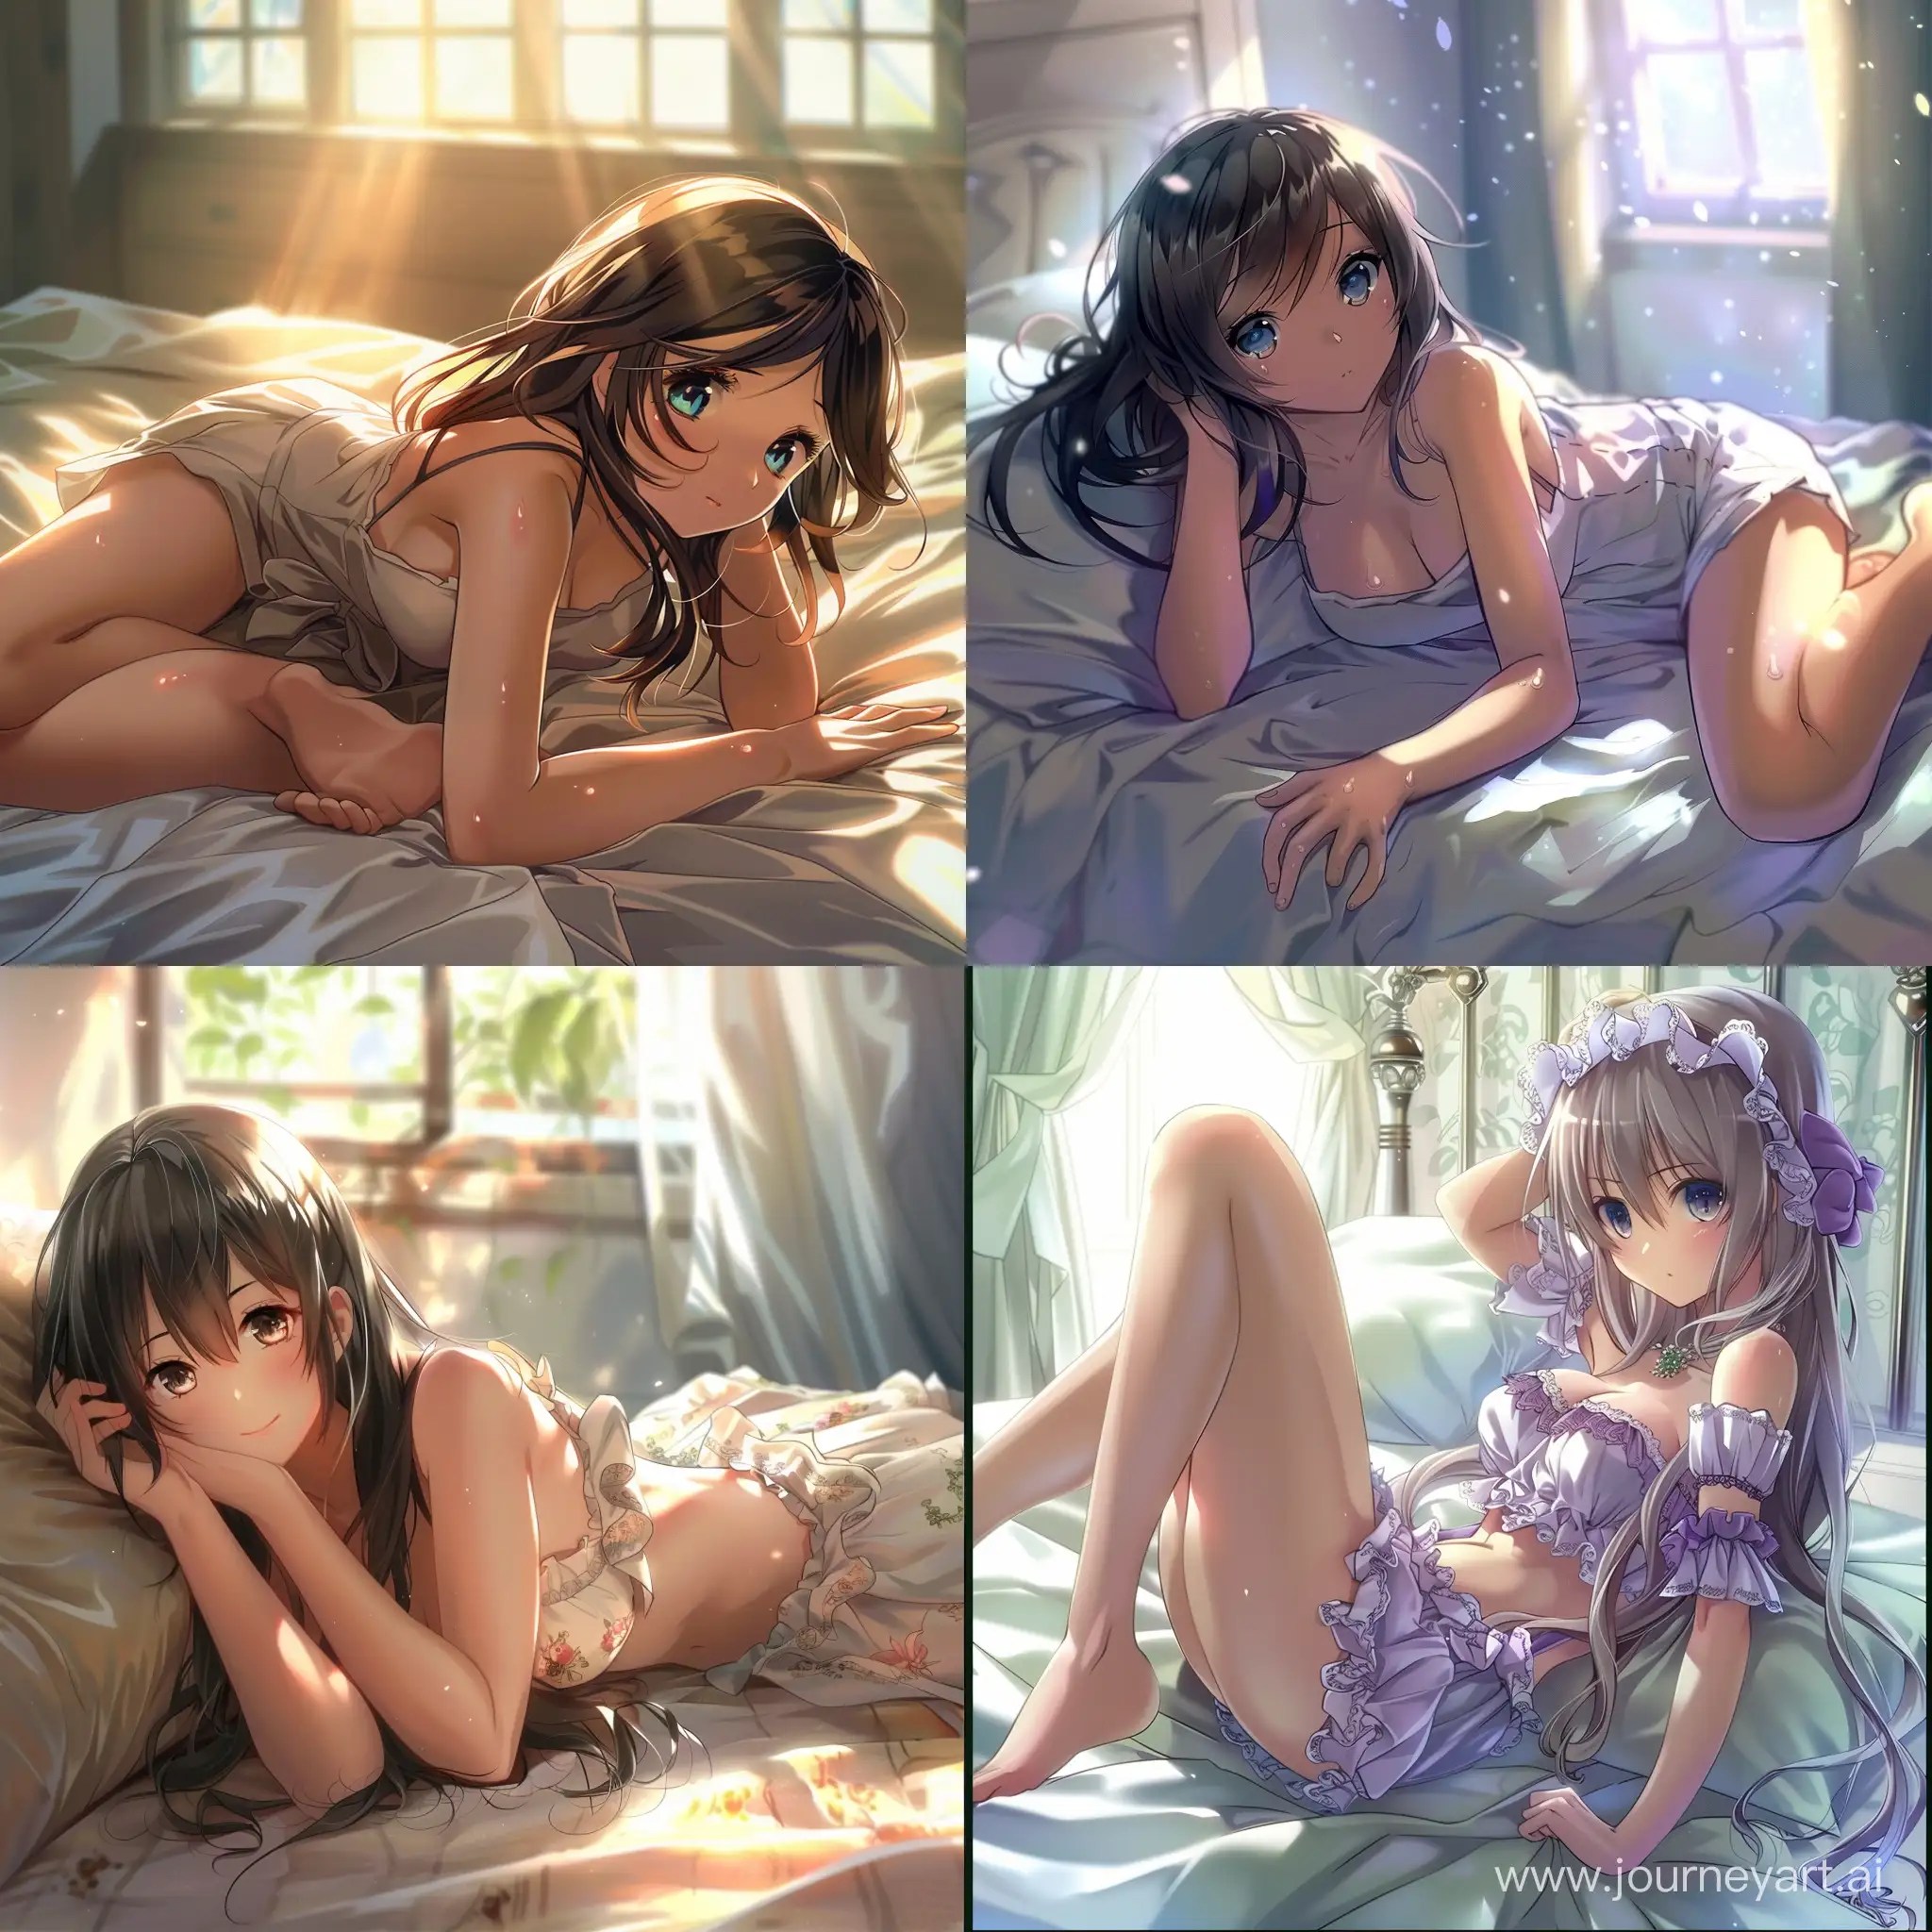 Anime-Girl-Relaxing-on-Bed-in-High-Definition-Anime-Style